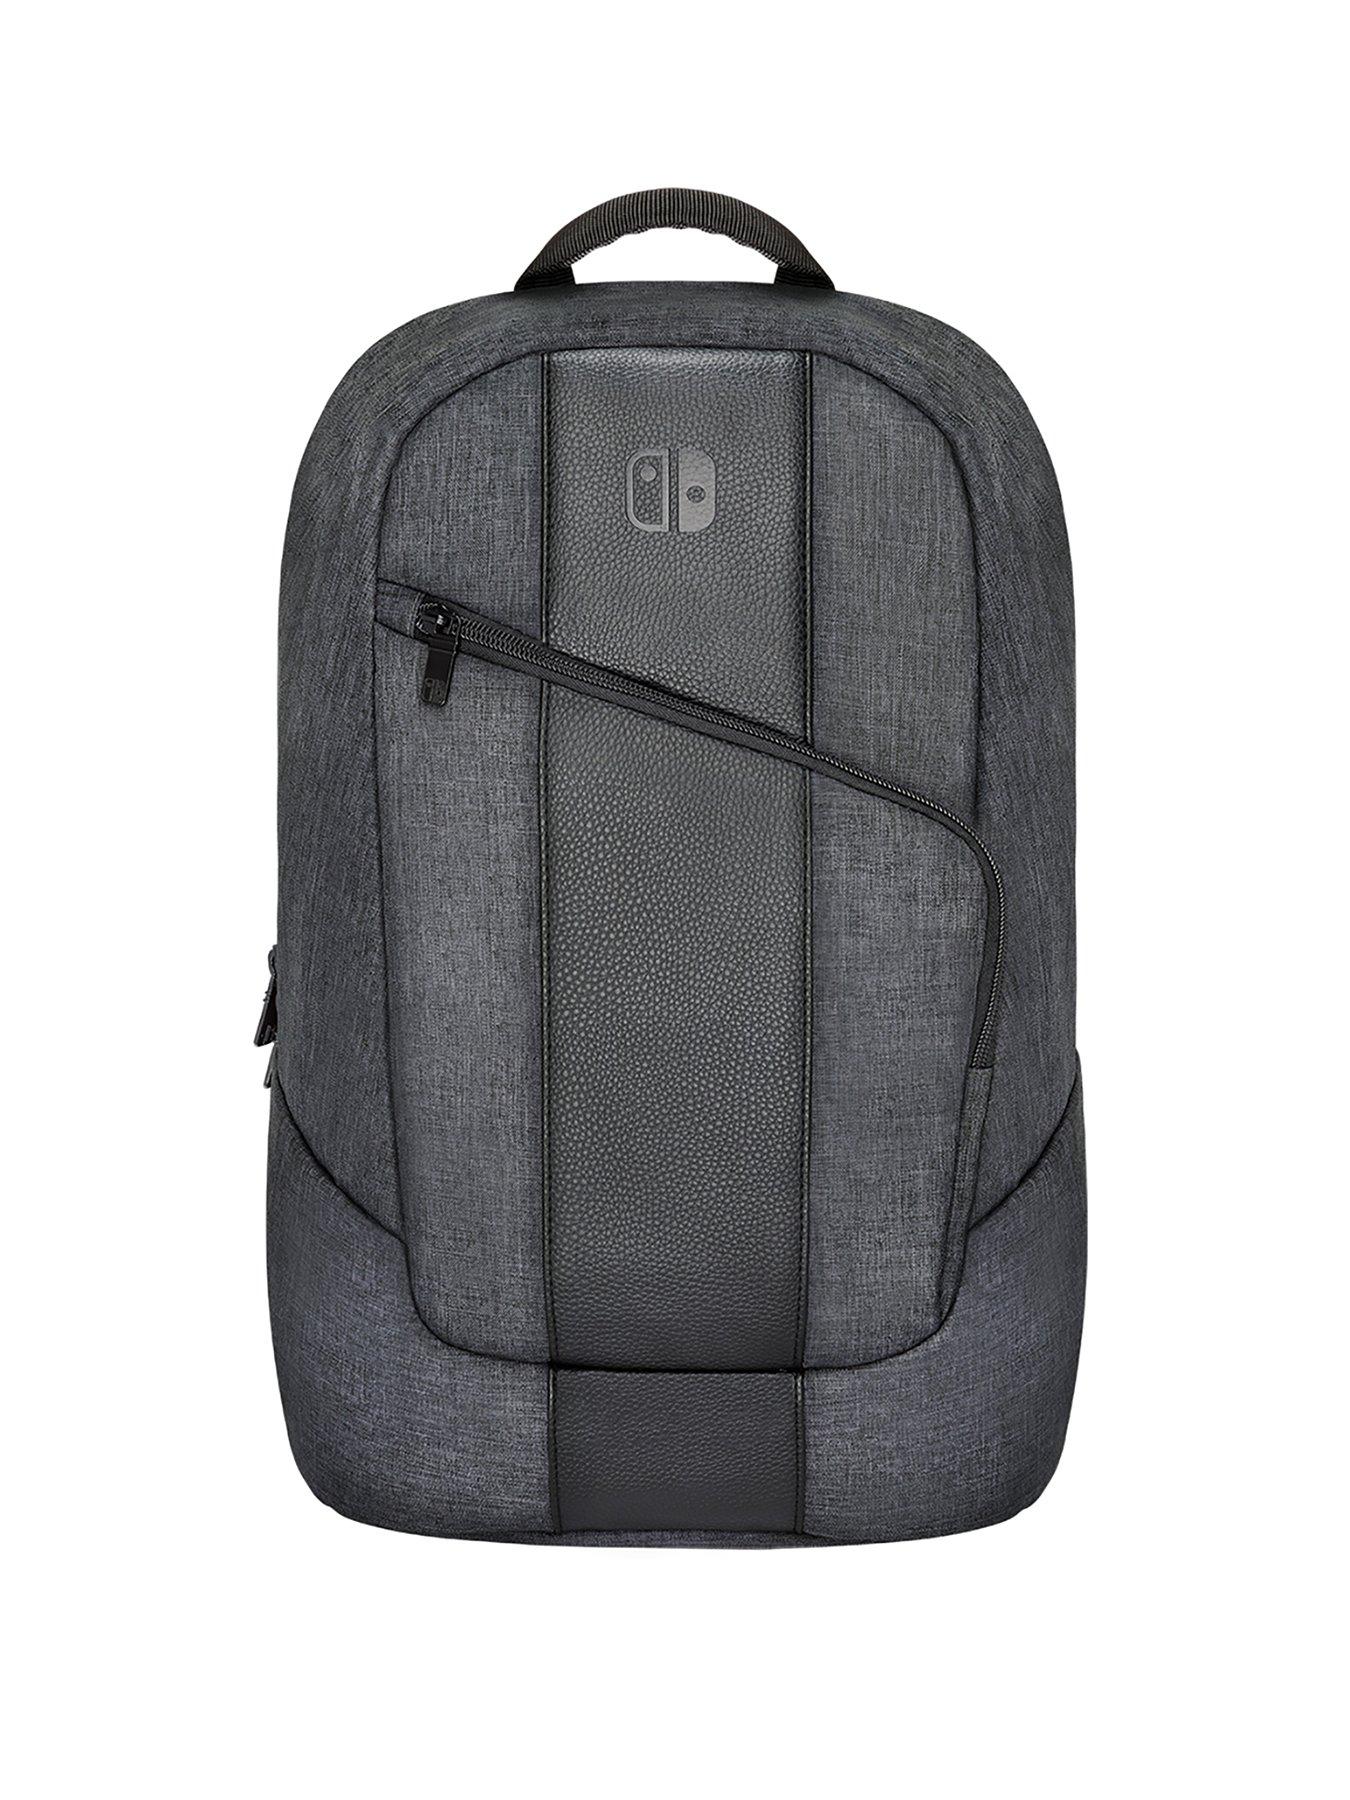 system backpack switch elite edition